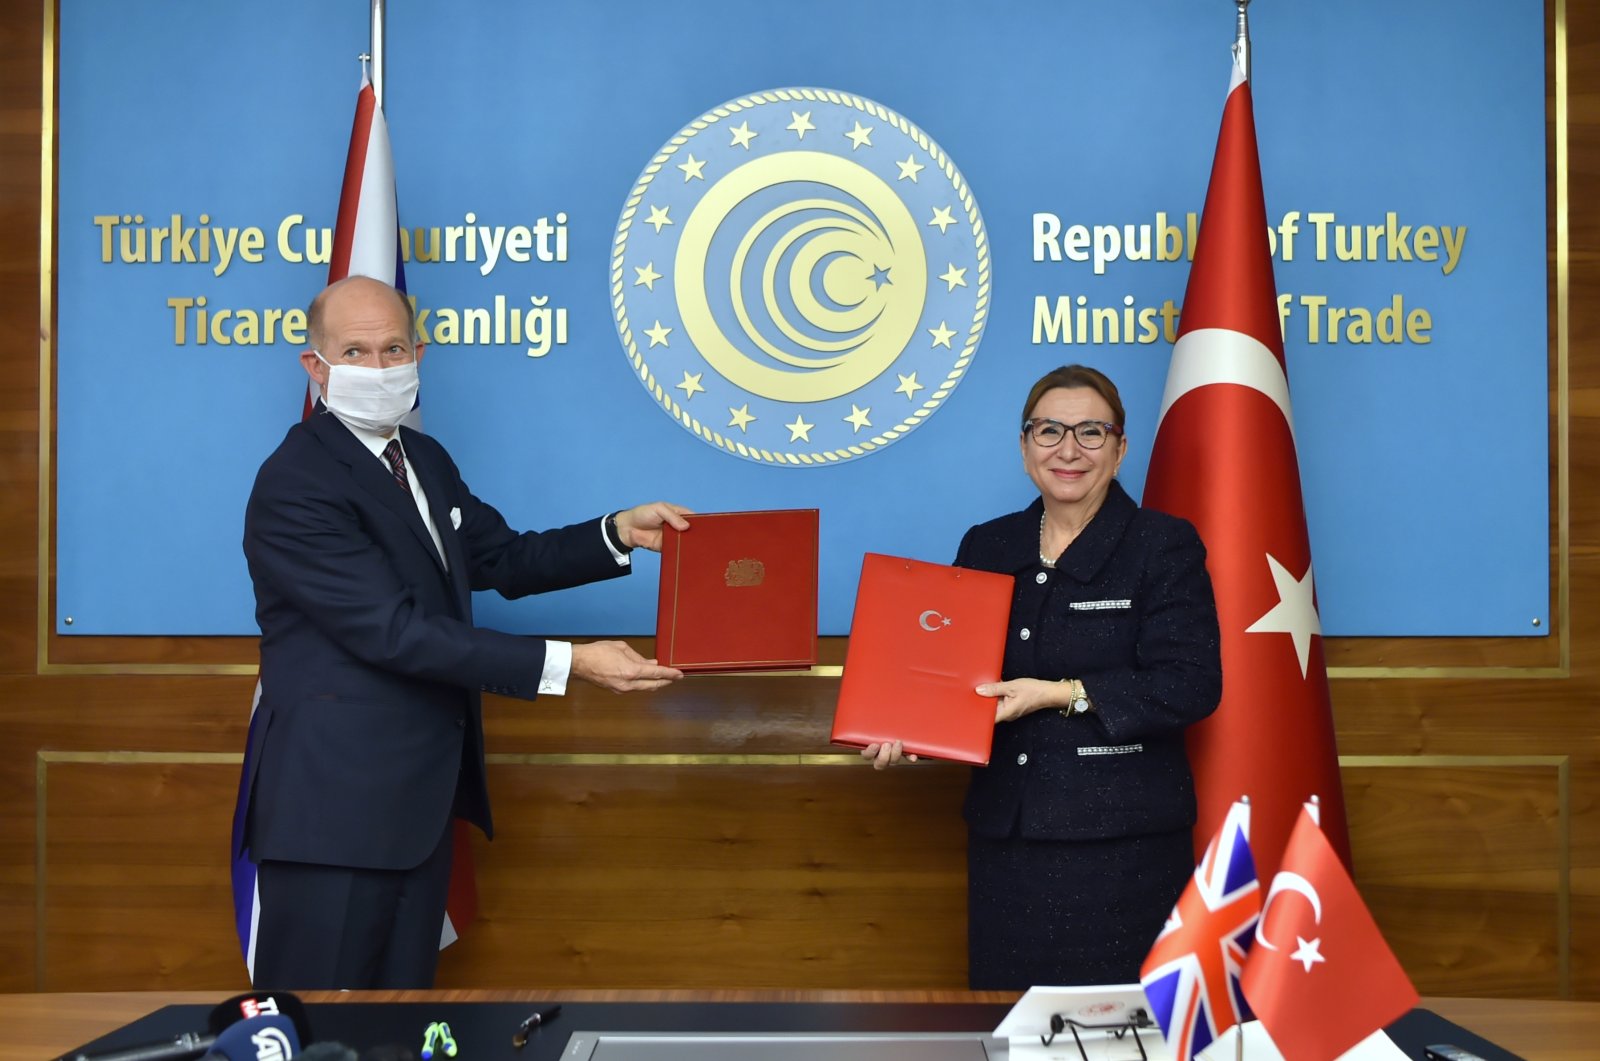 Trade Minister Ruhsar Pekcan (R) and the U.K.'s Ambassador to Ankara Dominick Chilcott are seen on the sidelines of the signing ceremony of the Turkey-U.K. free trade agreement in the capital Ankara, Turkey, Dec. 29, 2020. (AA Photo)
